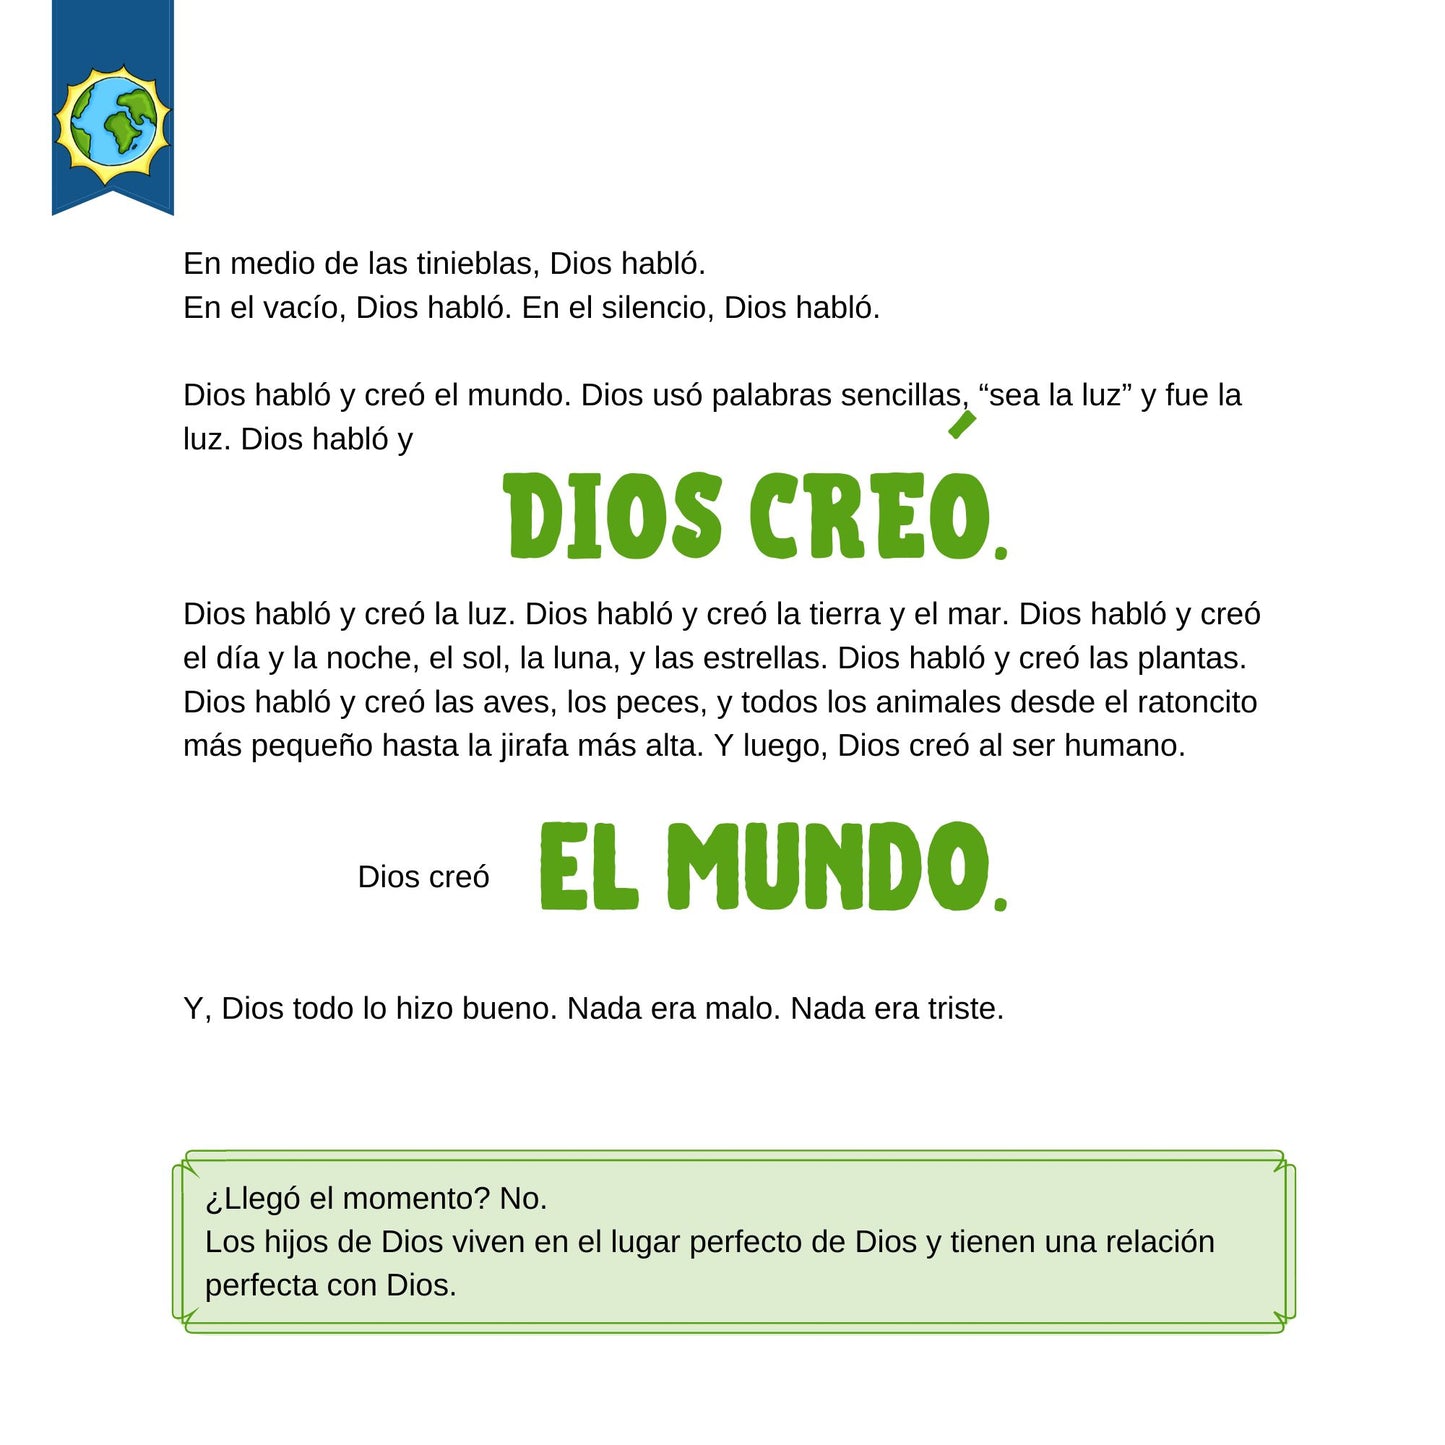 Spanish -  "Is It Time Yet?" Family Ebook for Advent and Christmas (download only)